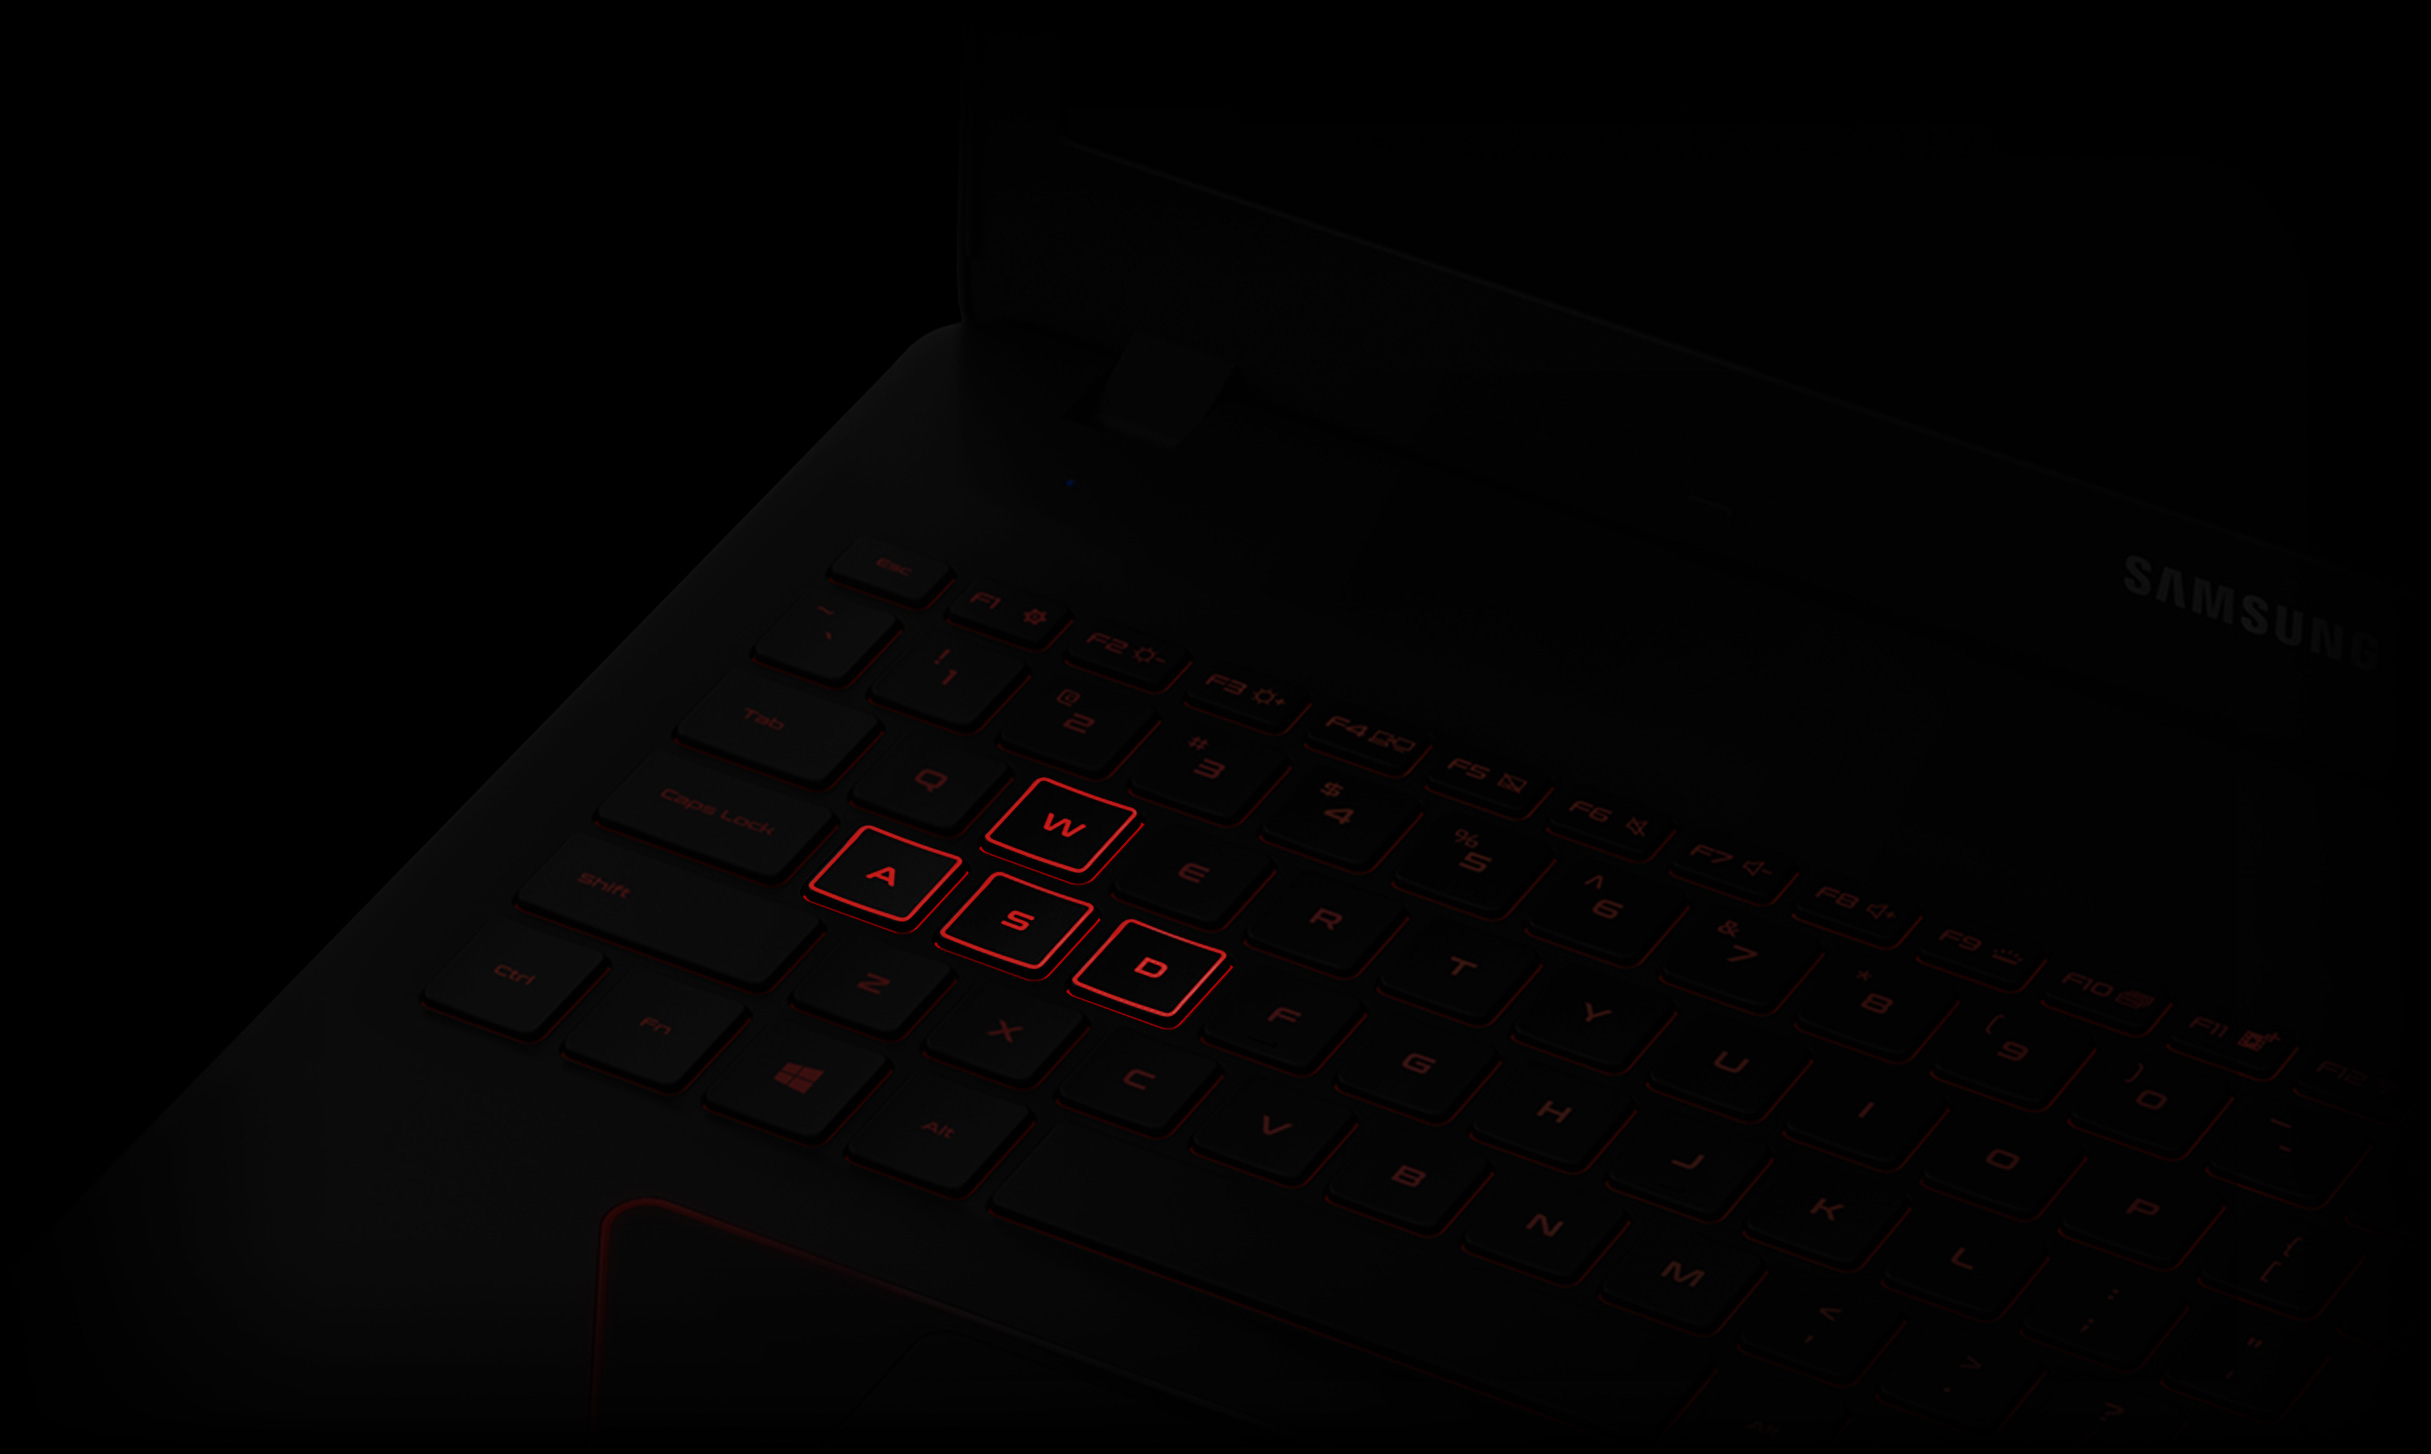 This is an image that shows Notebook Odyssey’s keyboard.